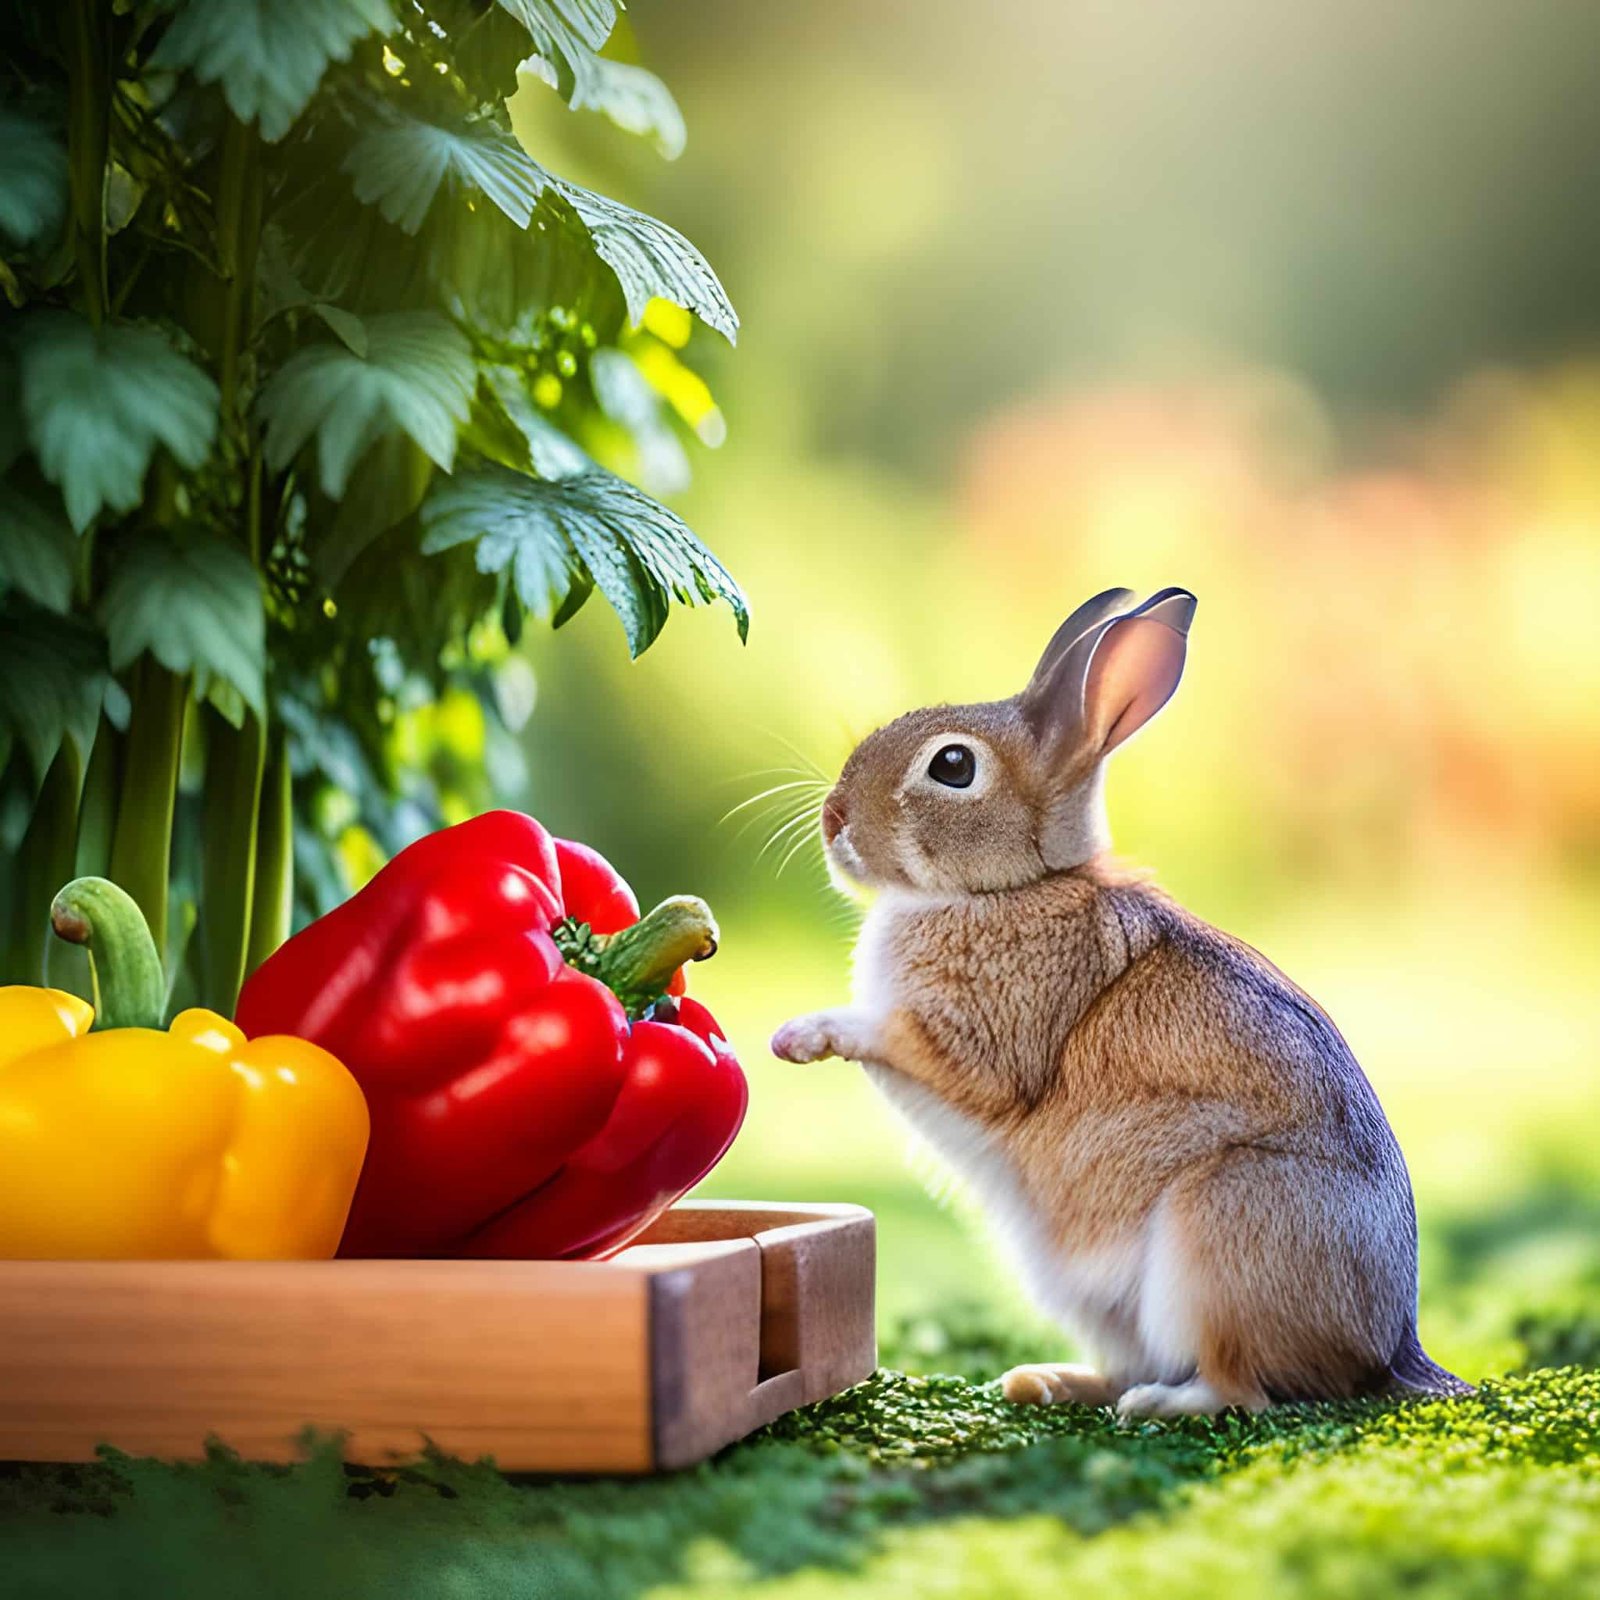 Can Bunnies Eat Bell Peppers?